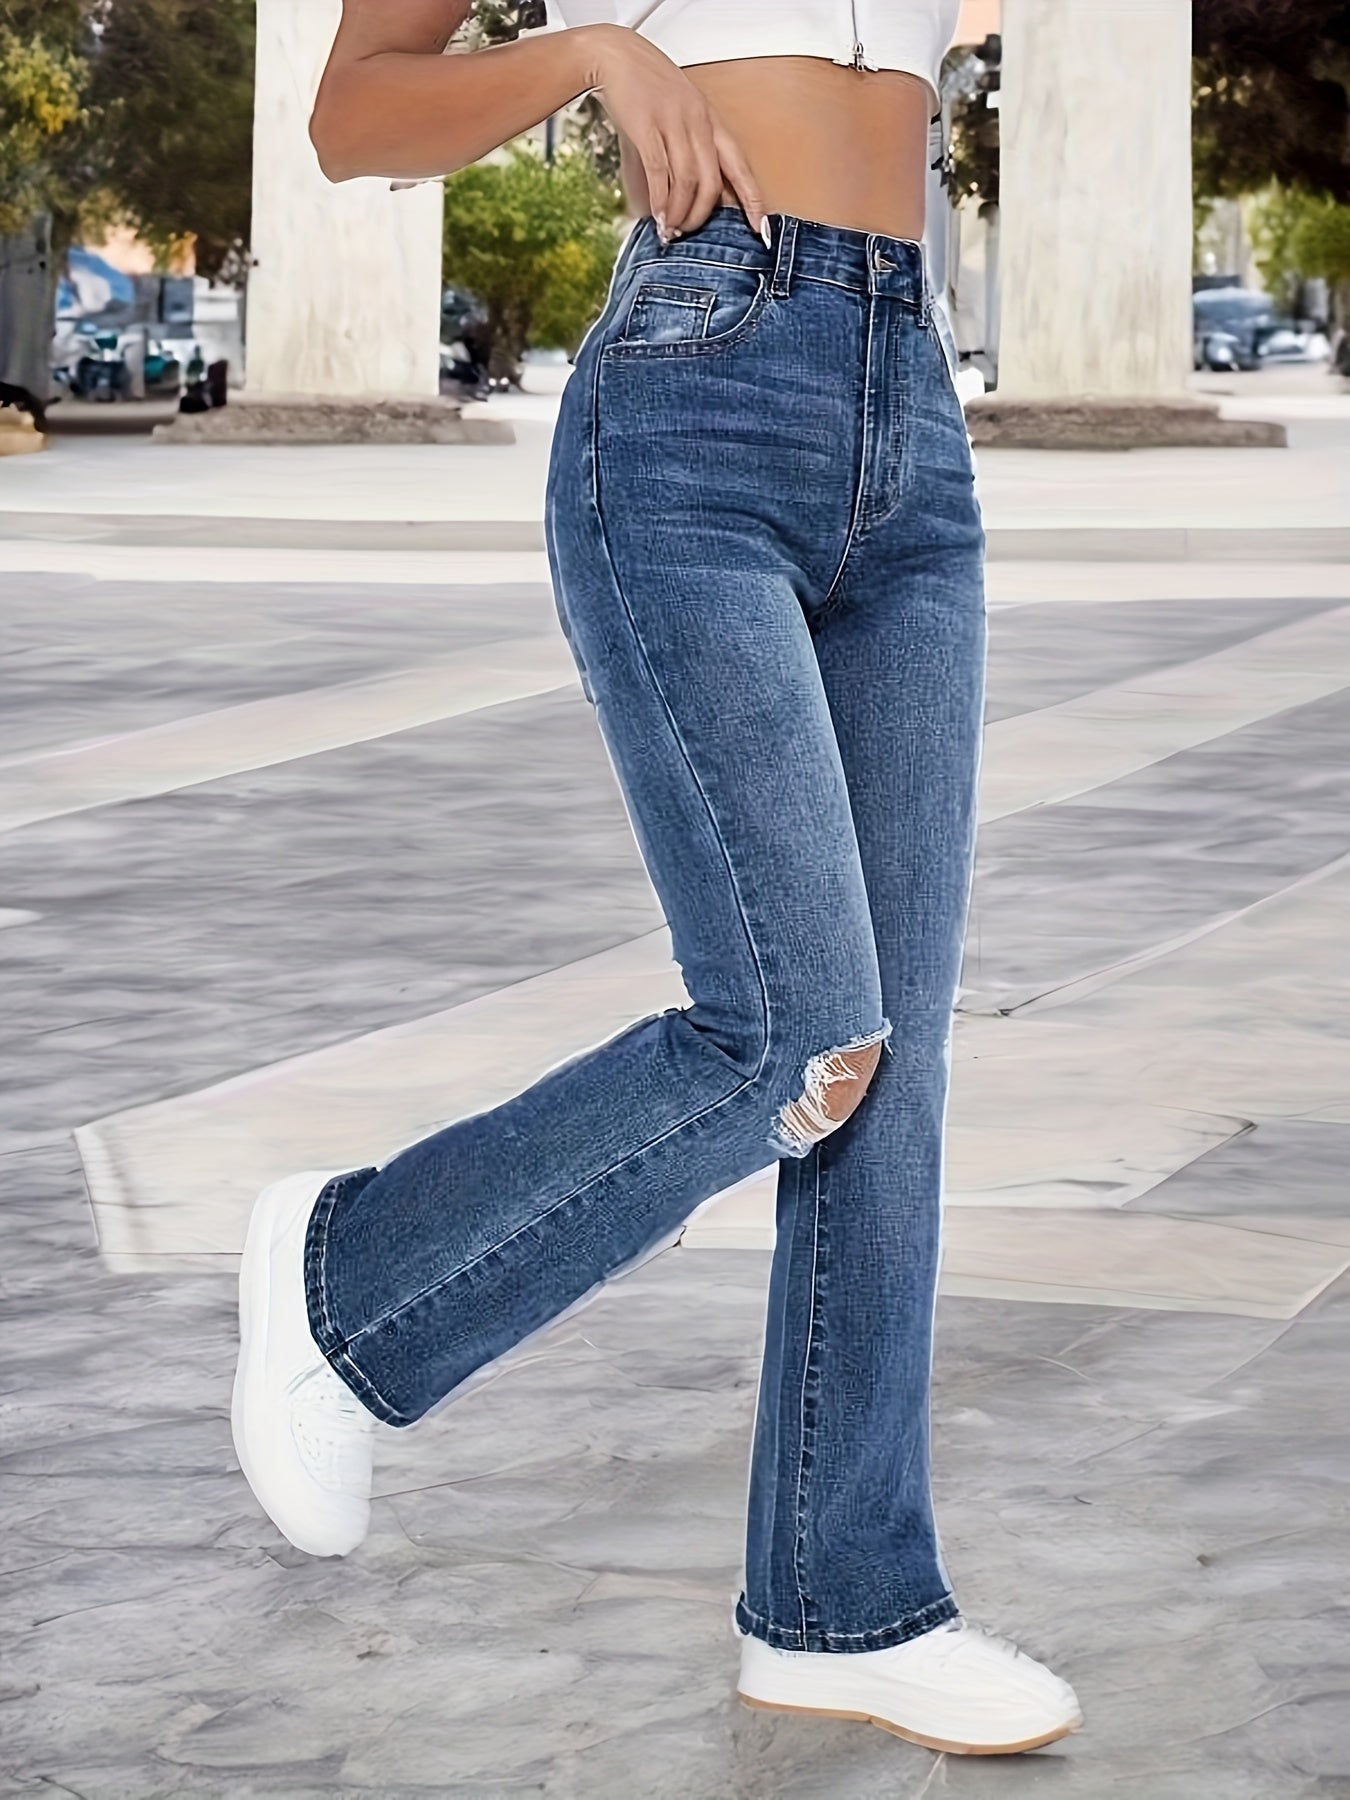 Antmvs Blue Ripped Holes Straight Jeans, High Stretch Distressed Casual Denim Pants, Women's Denim Jeans & Clothing